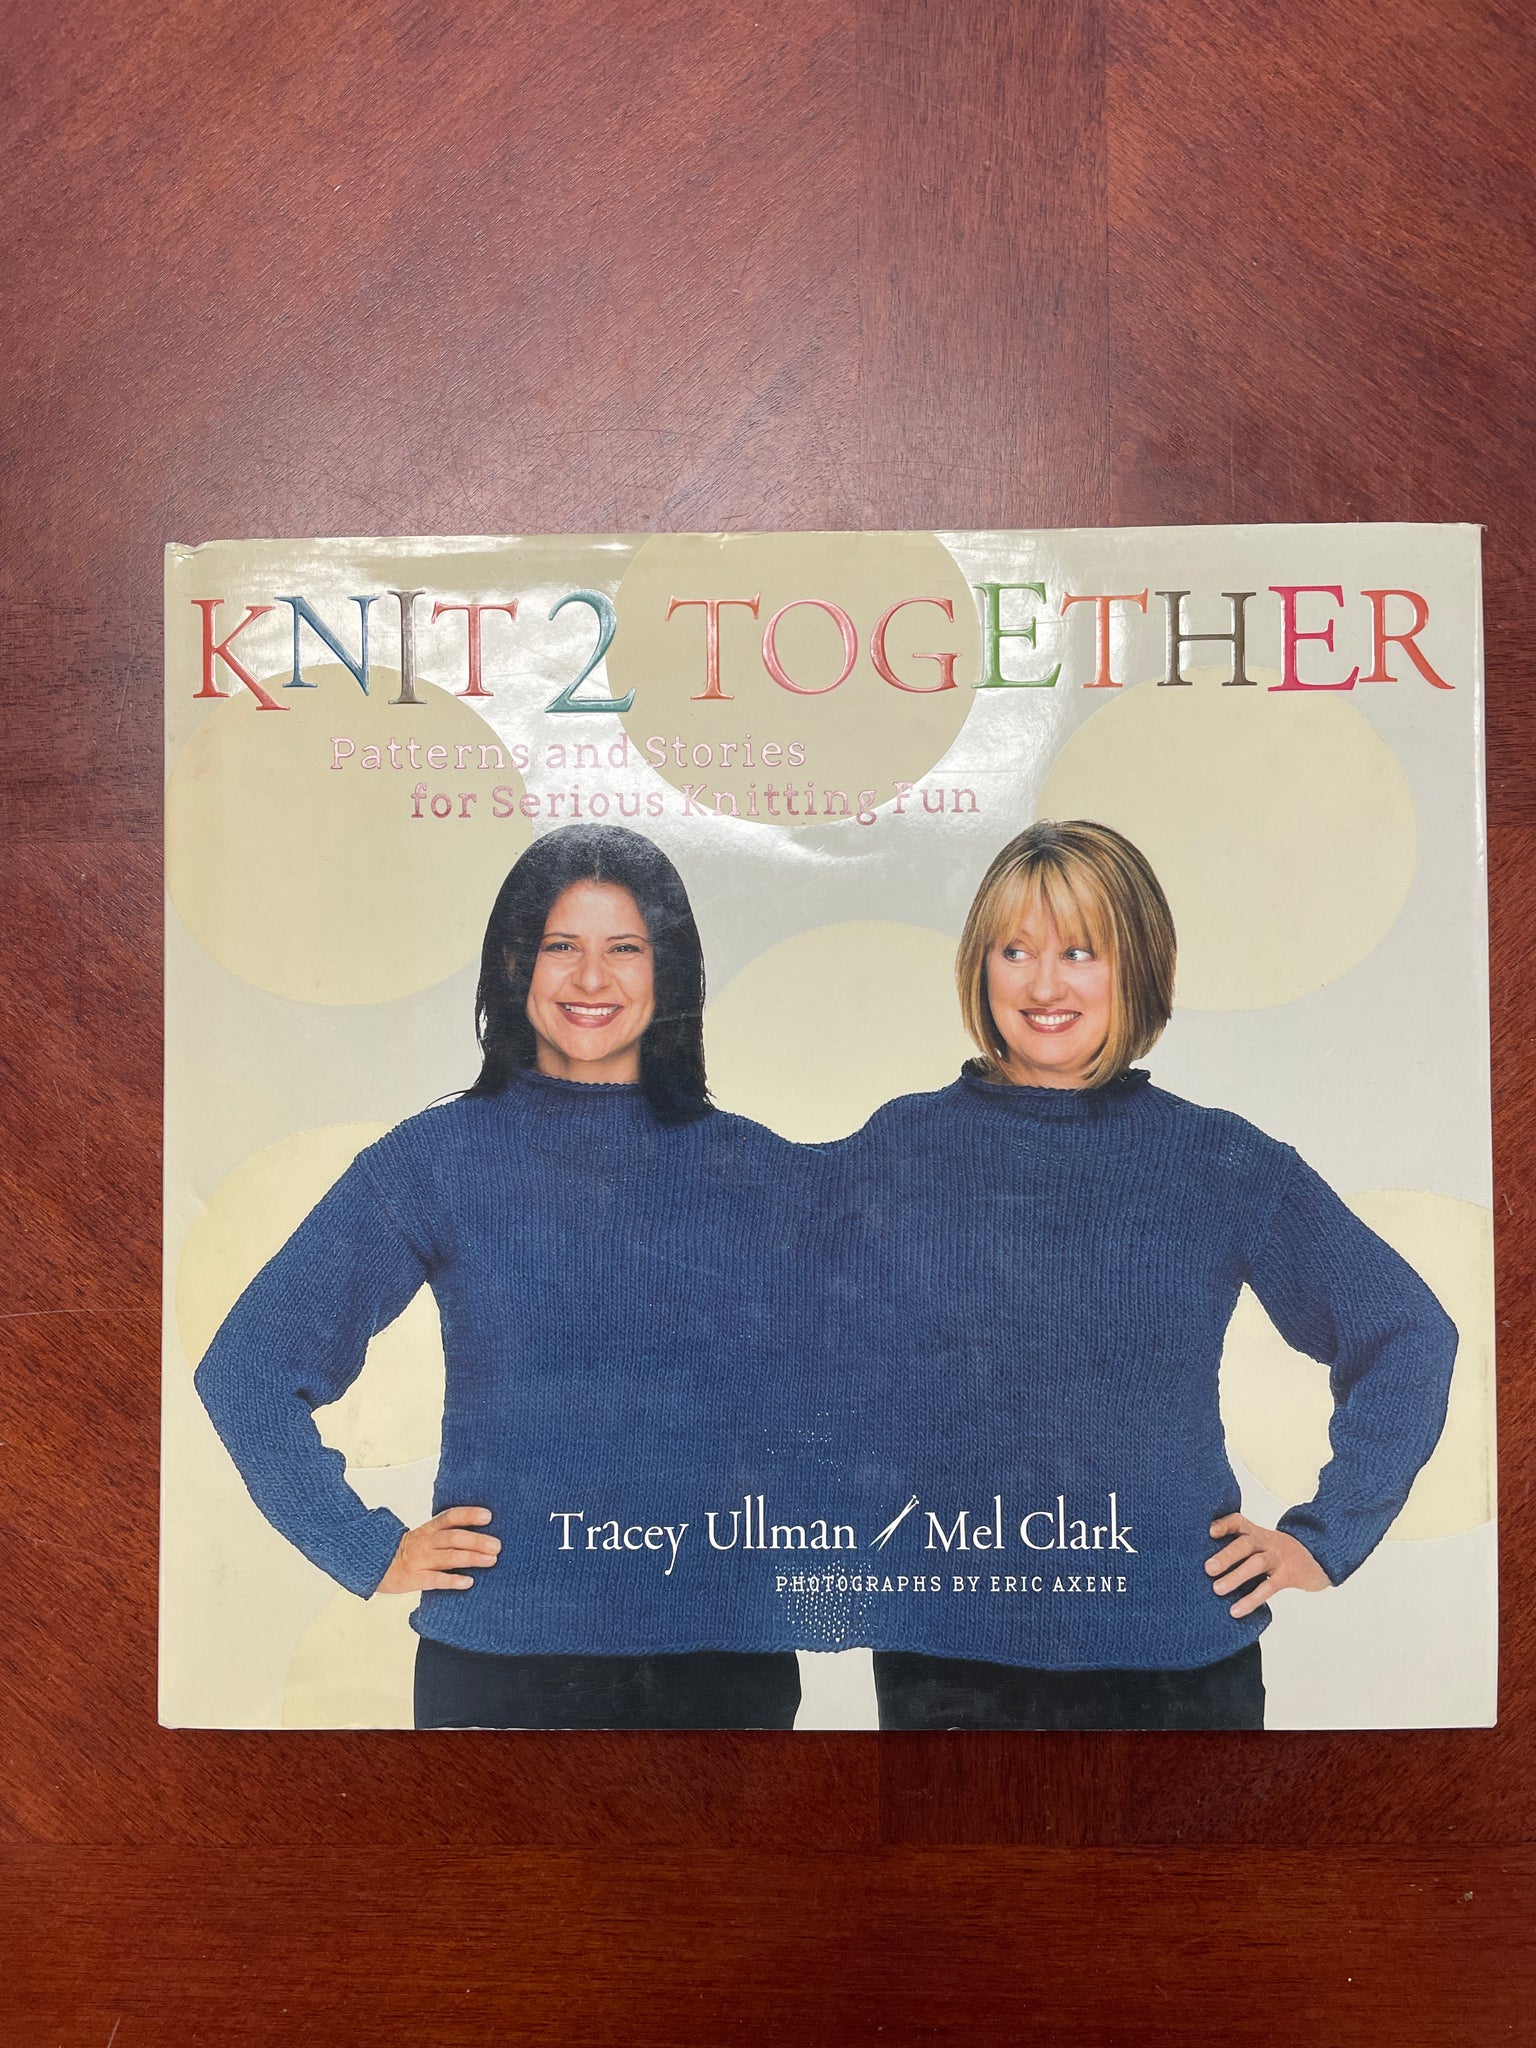 2006 Knitting Book - "Knit 2 Together"